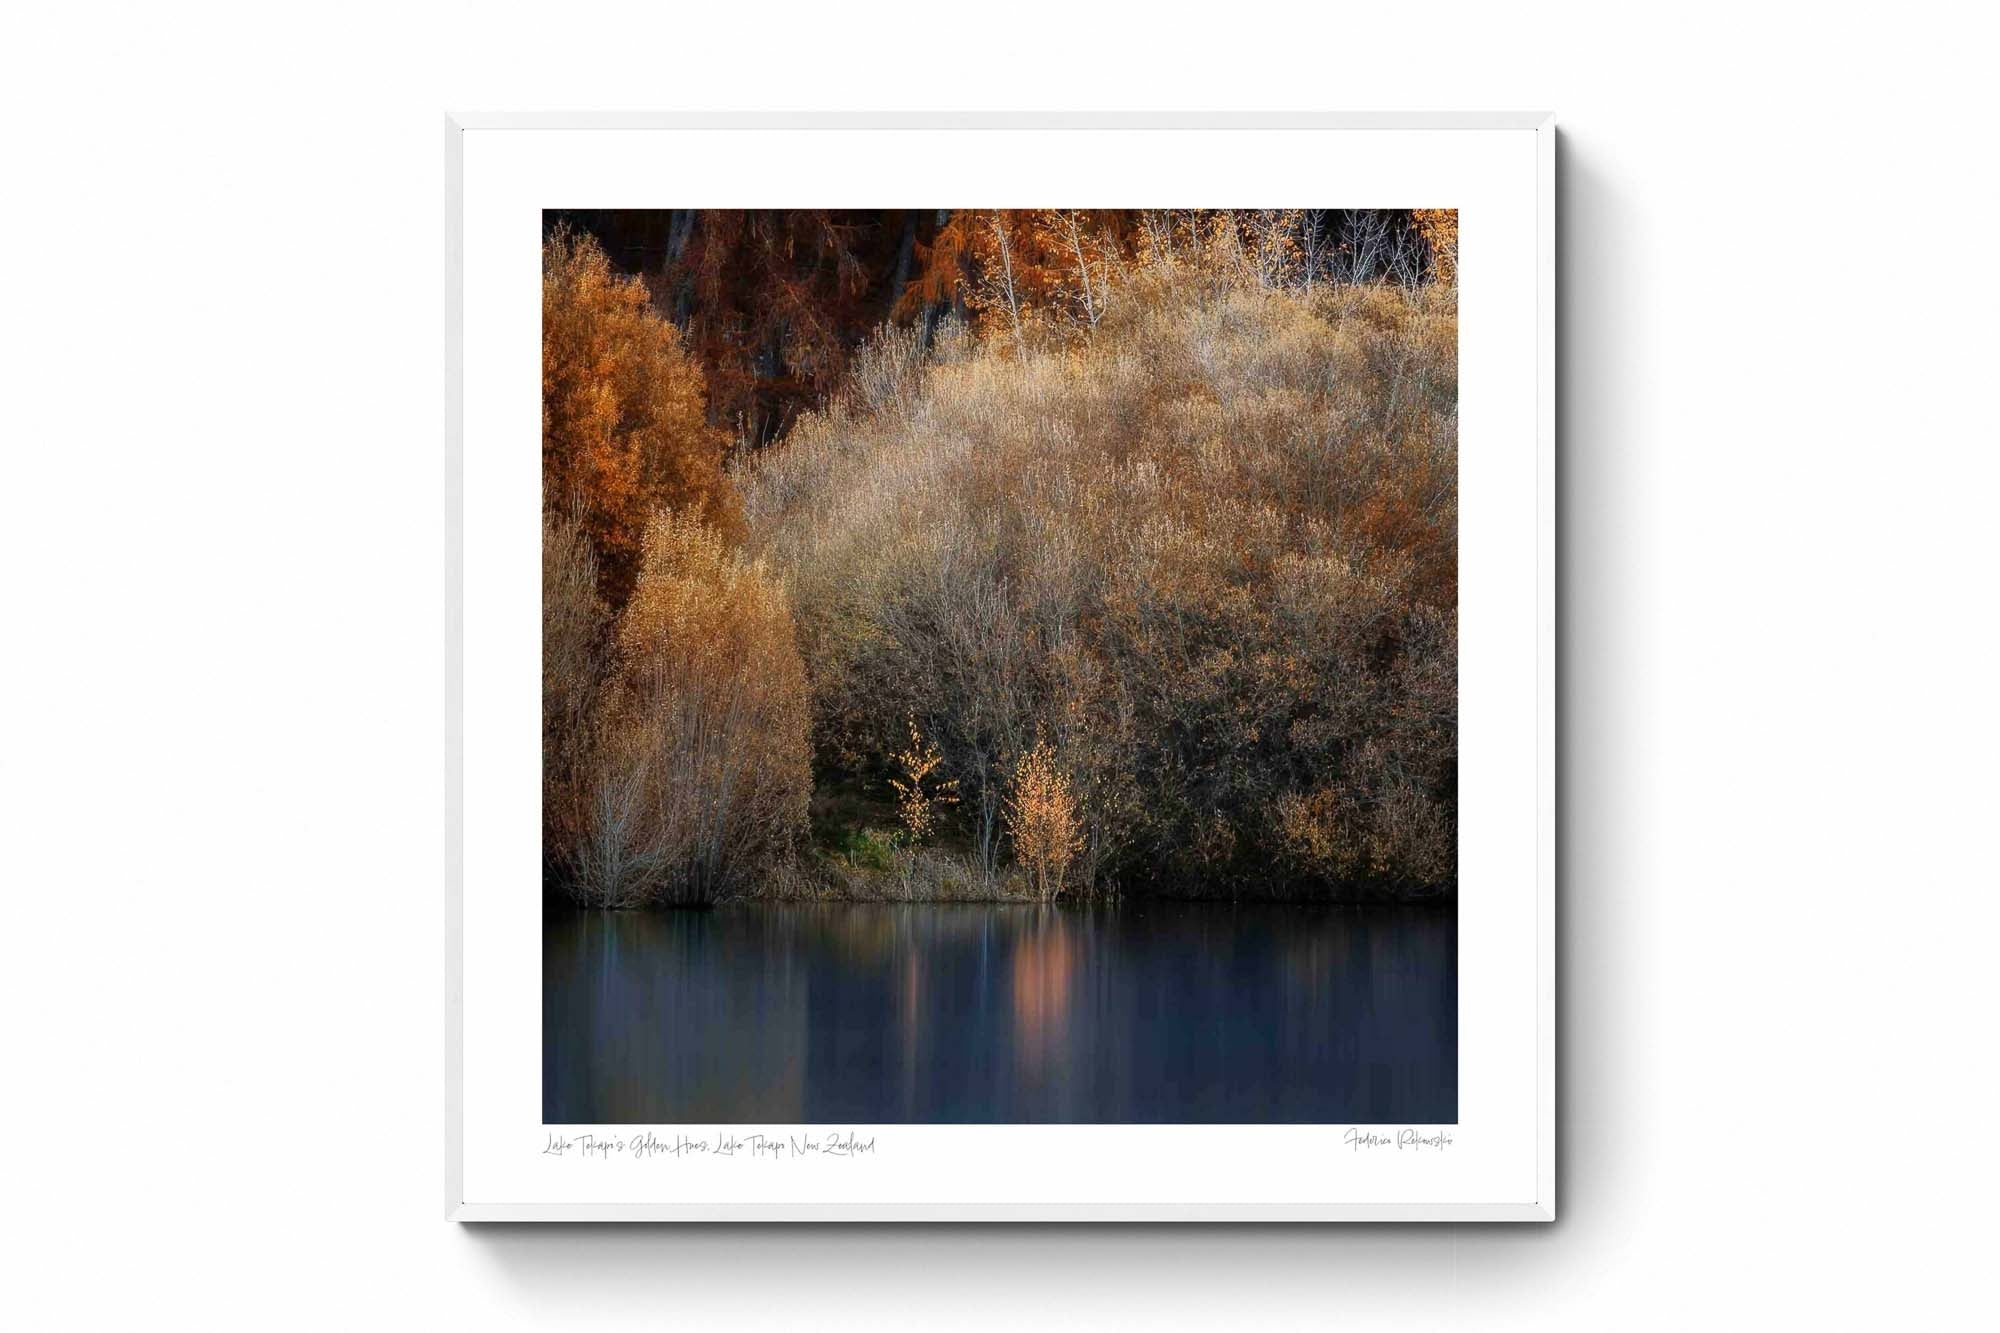 Golden autumn foliage by the peaceful shores of Lake Tekapo, New Zealand, with reflections in the calm water.